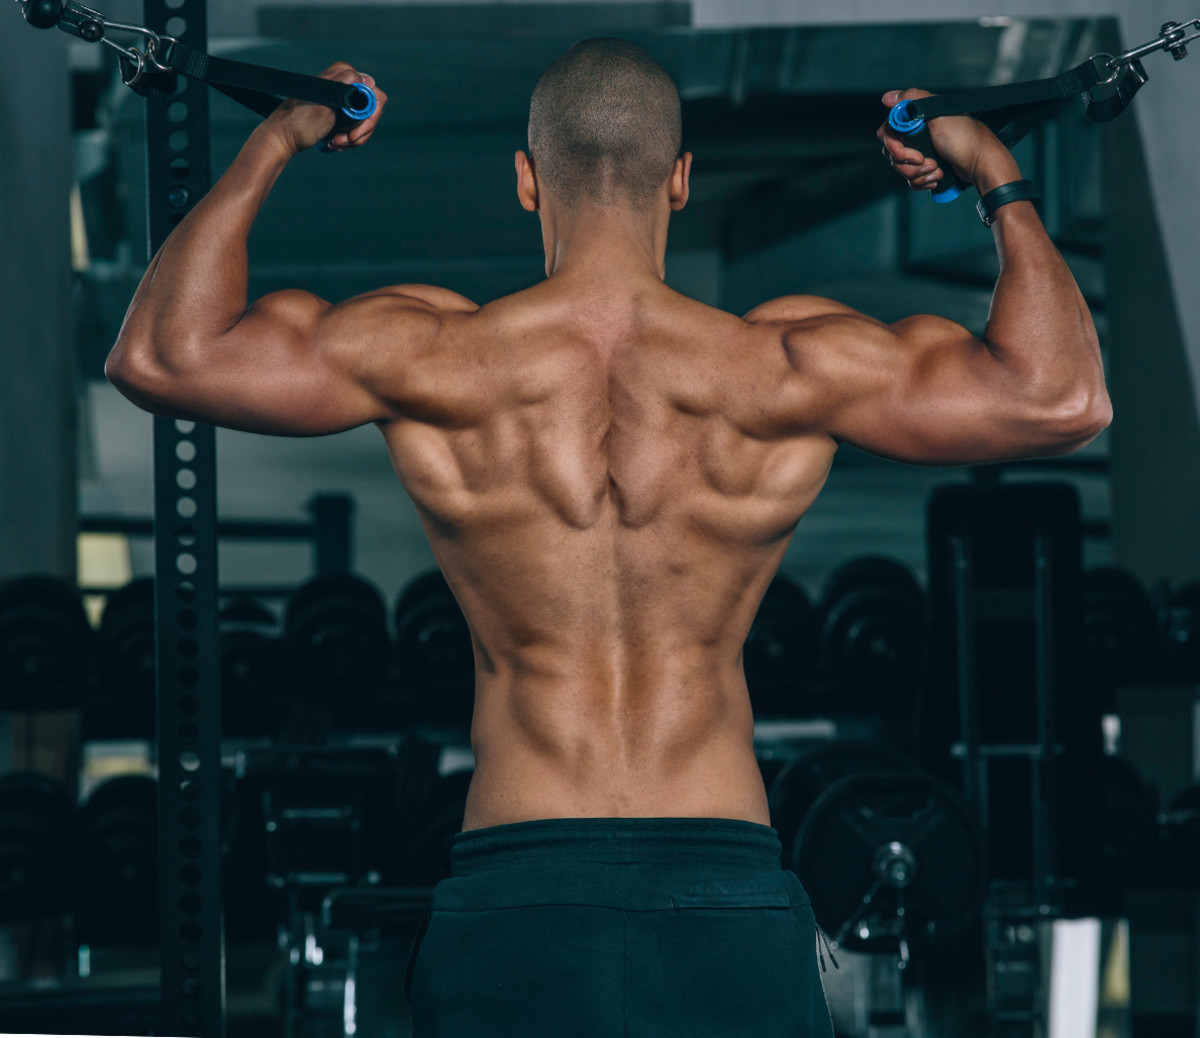 How to get more muscle definition (and what you should know about